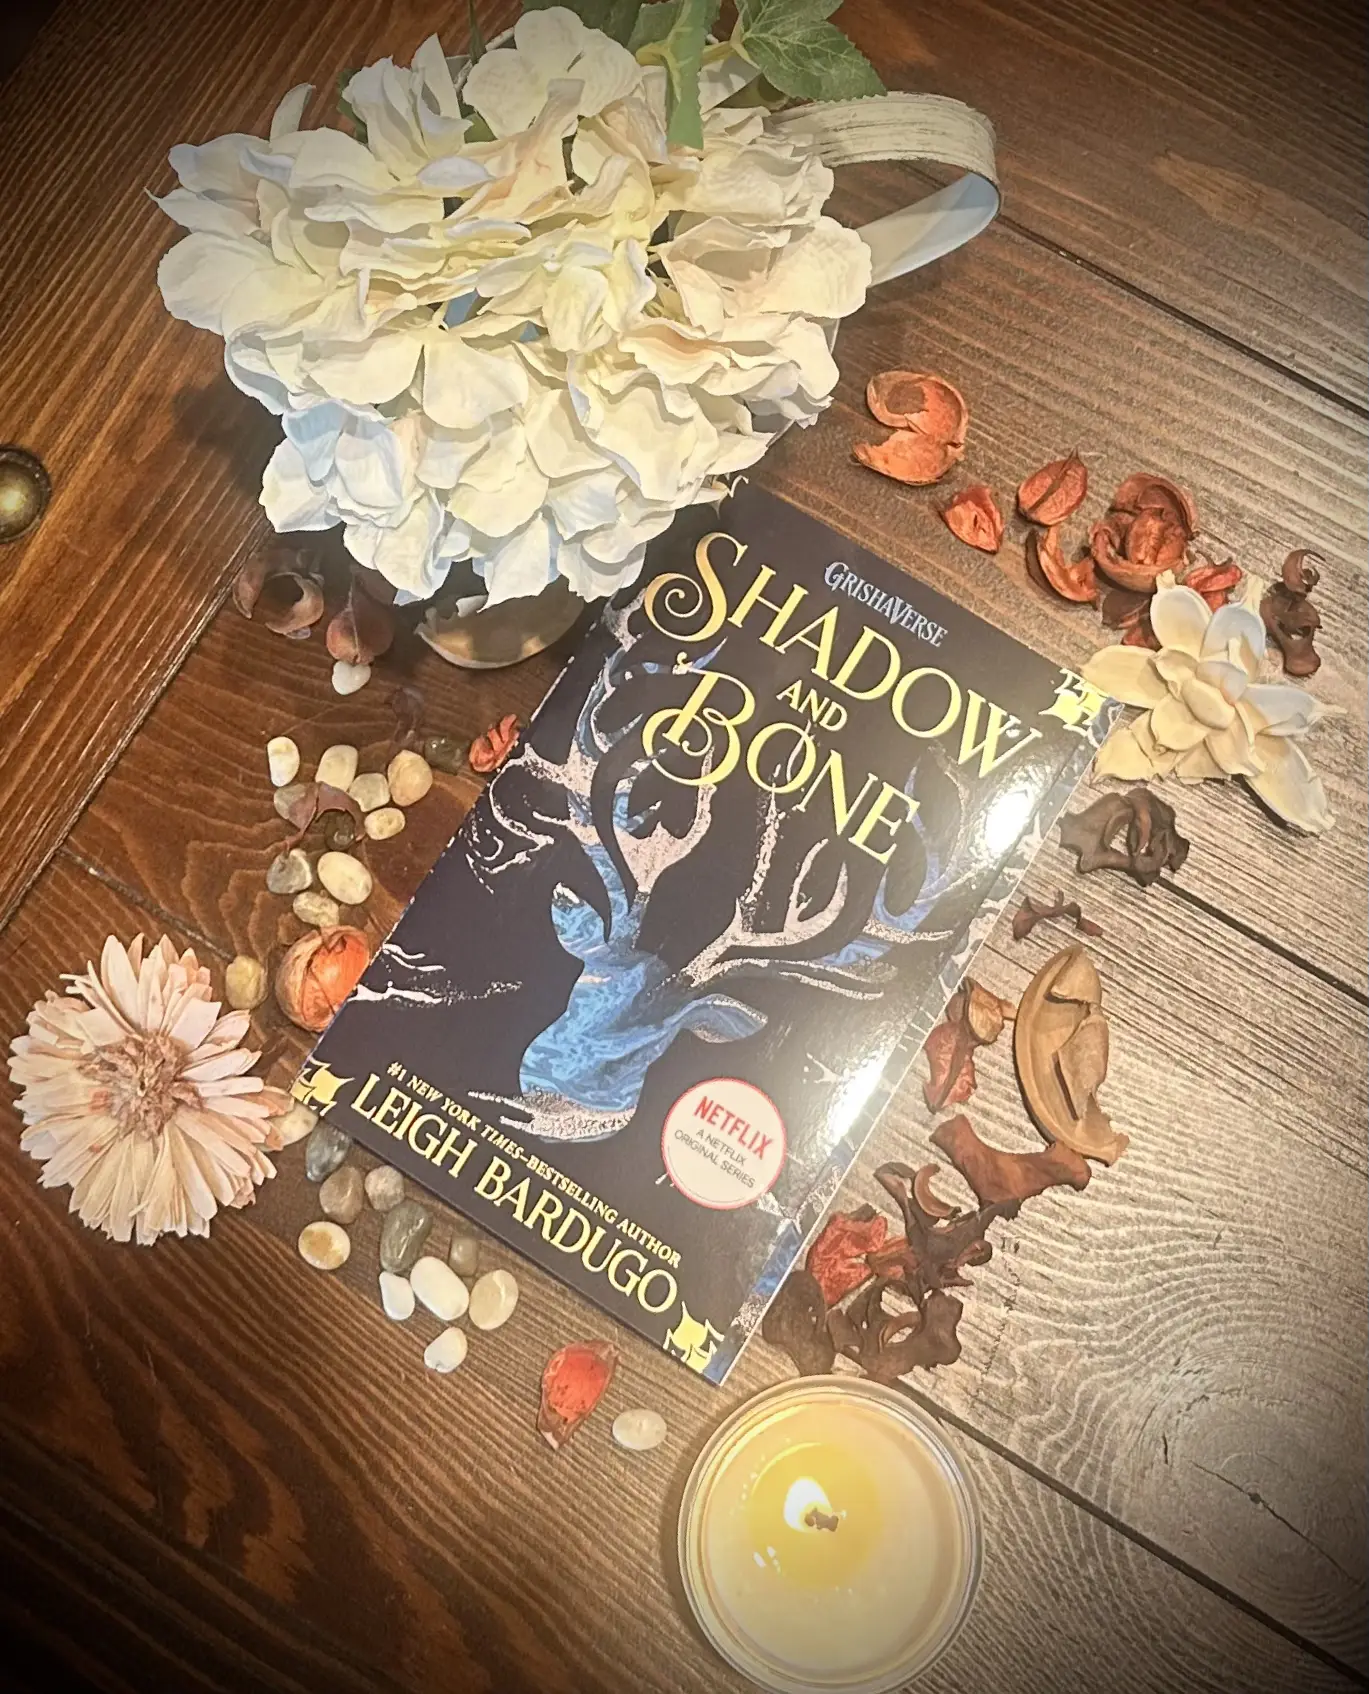 Review: Shadow and Bone by Leigh Bardugo – Reading with Jenna